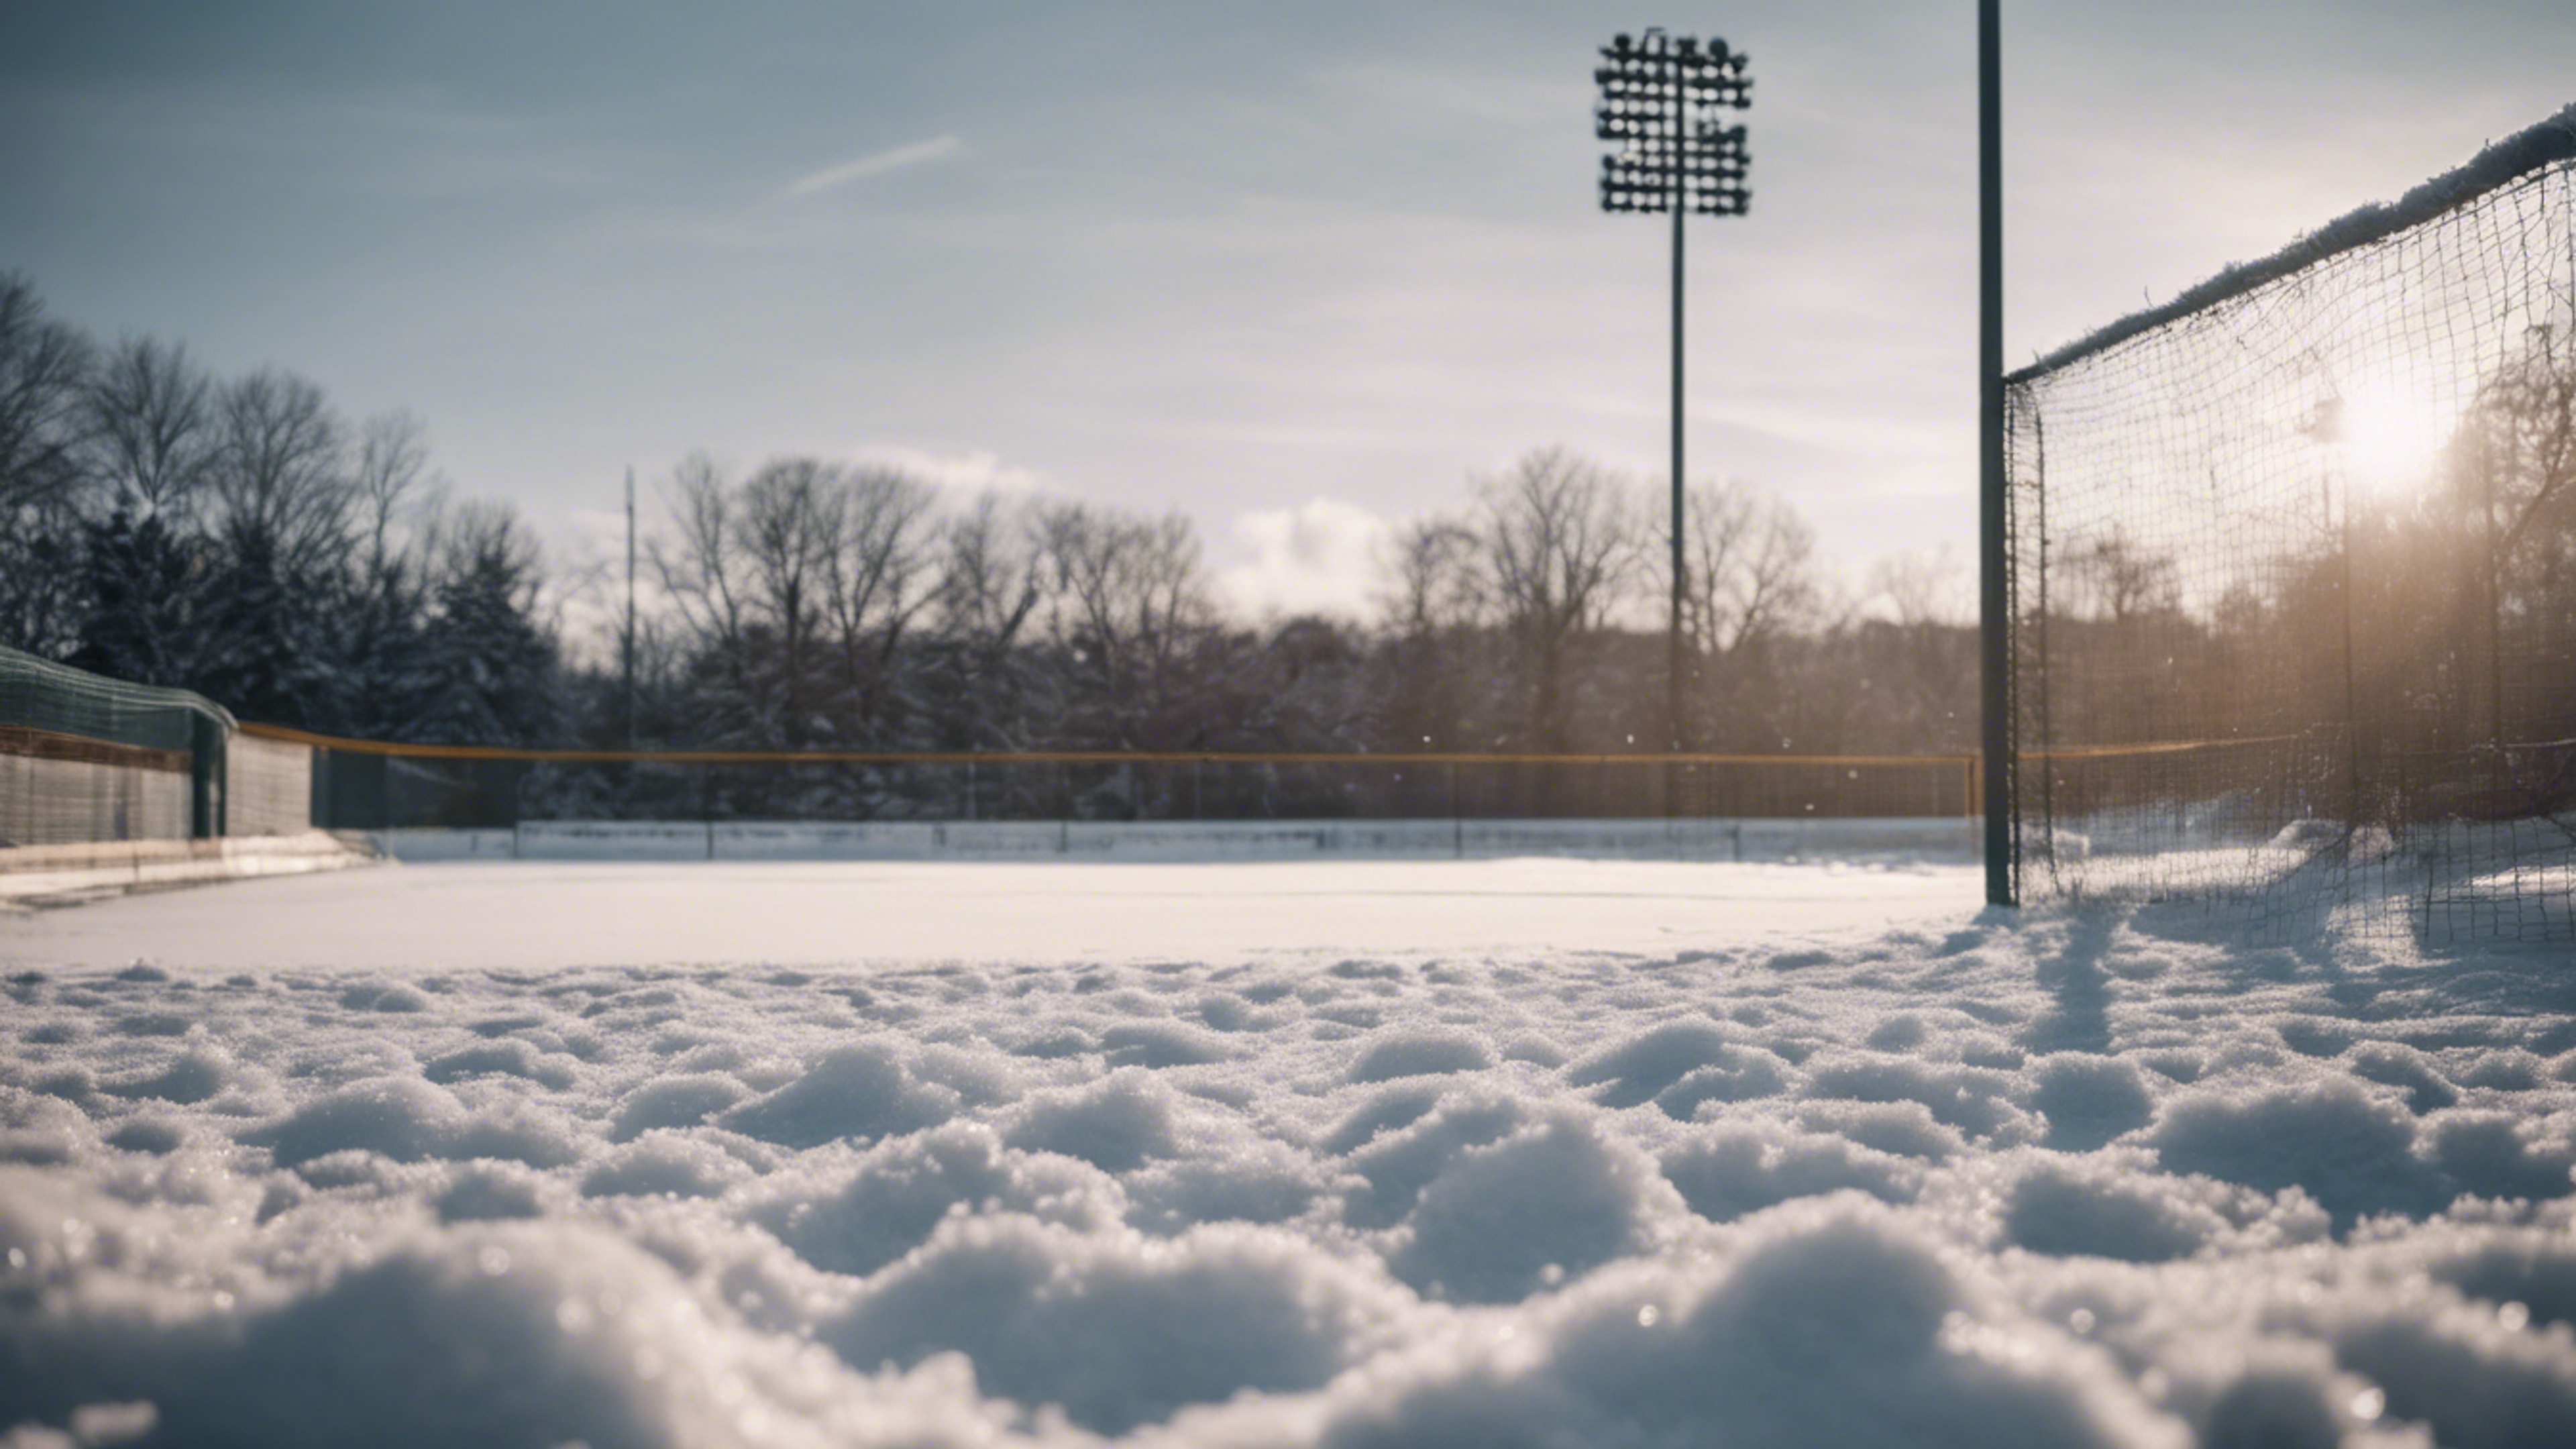 A baseball field covered in a thin layer of snow during off-season. Wallpaper[abf98c57f7b048239f2f]